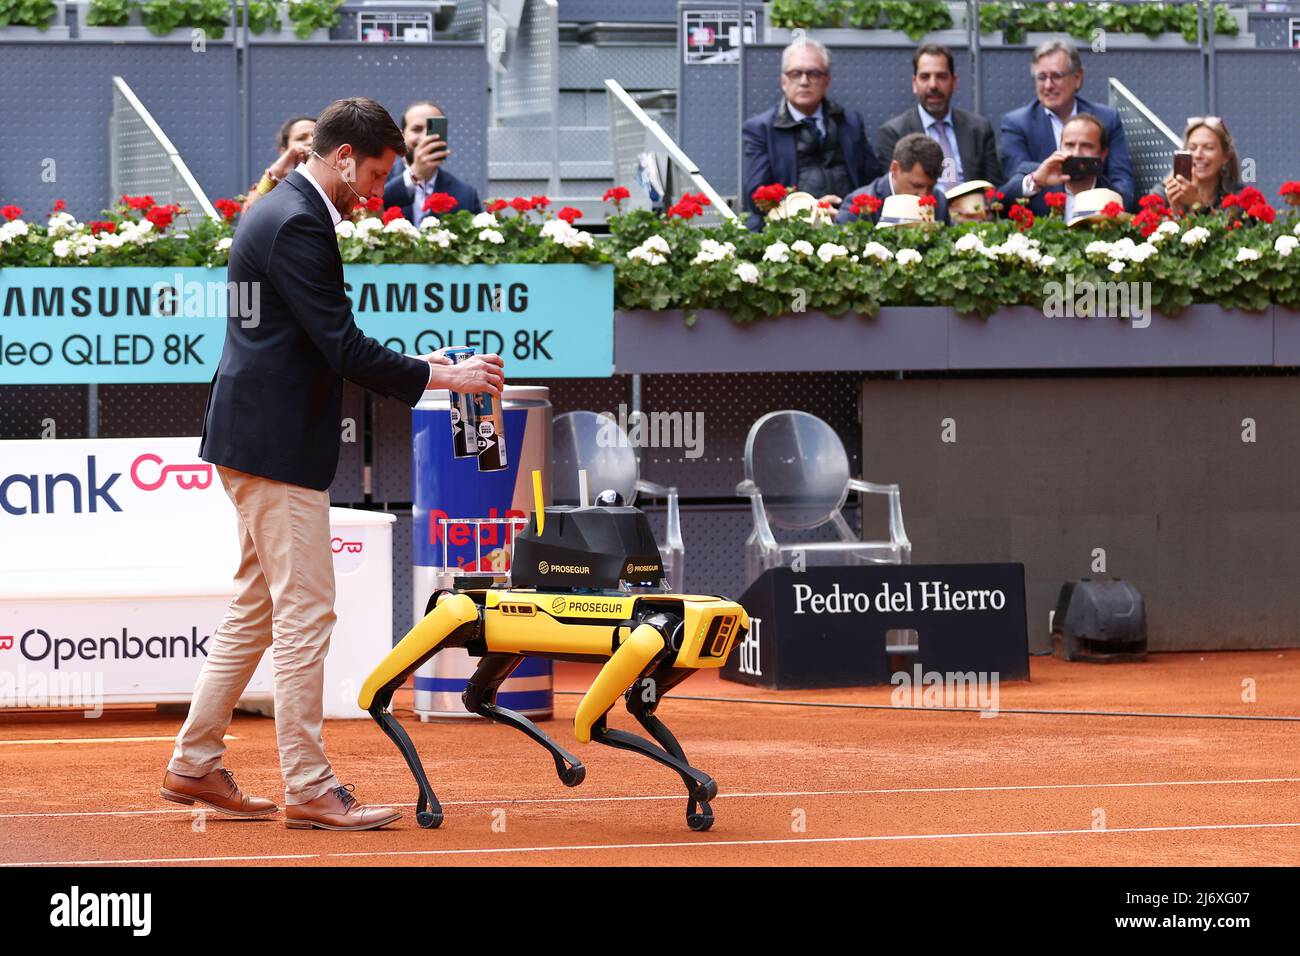 Ball robot is seen during the Mutua Madrid Open 2022 tennis tournament on May 4, 2022 at Caja Magica stadium in Madrid, Spain - Photo: Oscar J Barroso/DPPI/LiveMedia Stock Photo